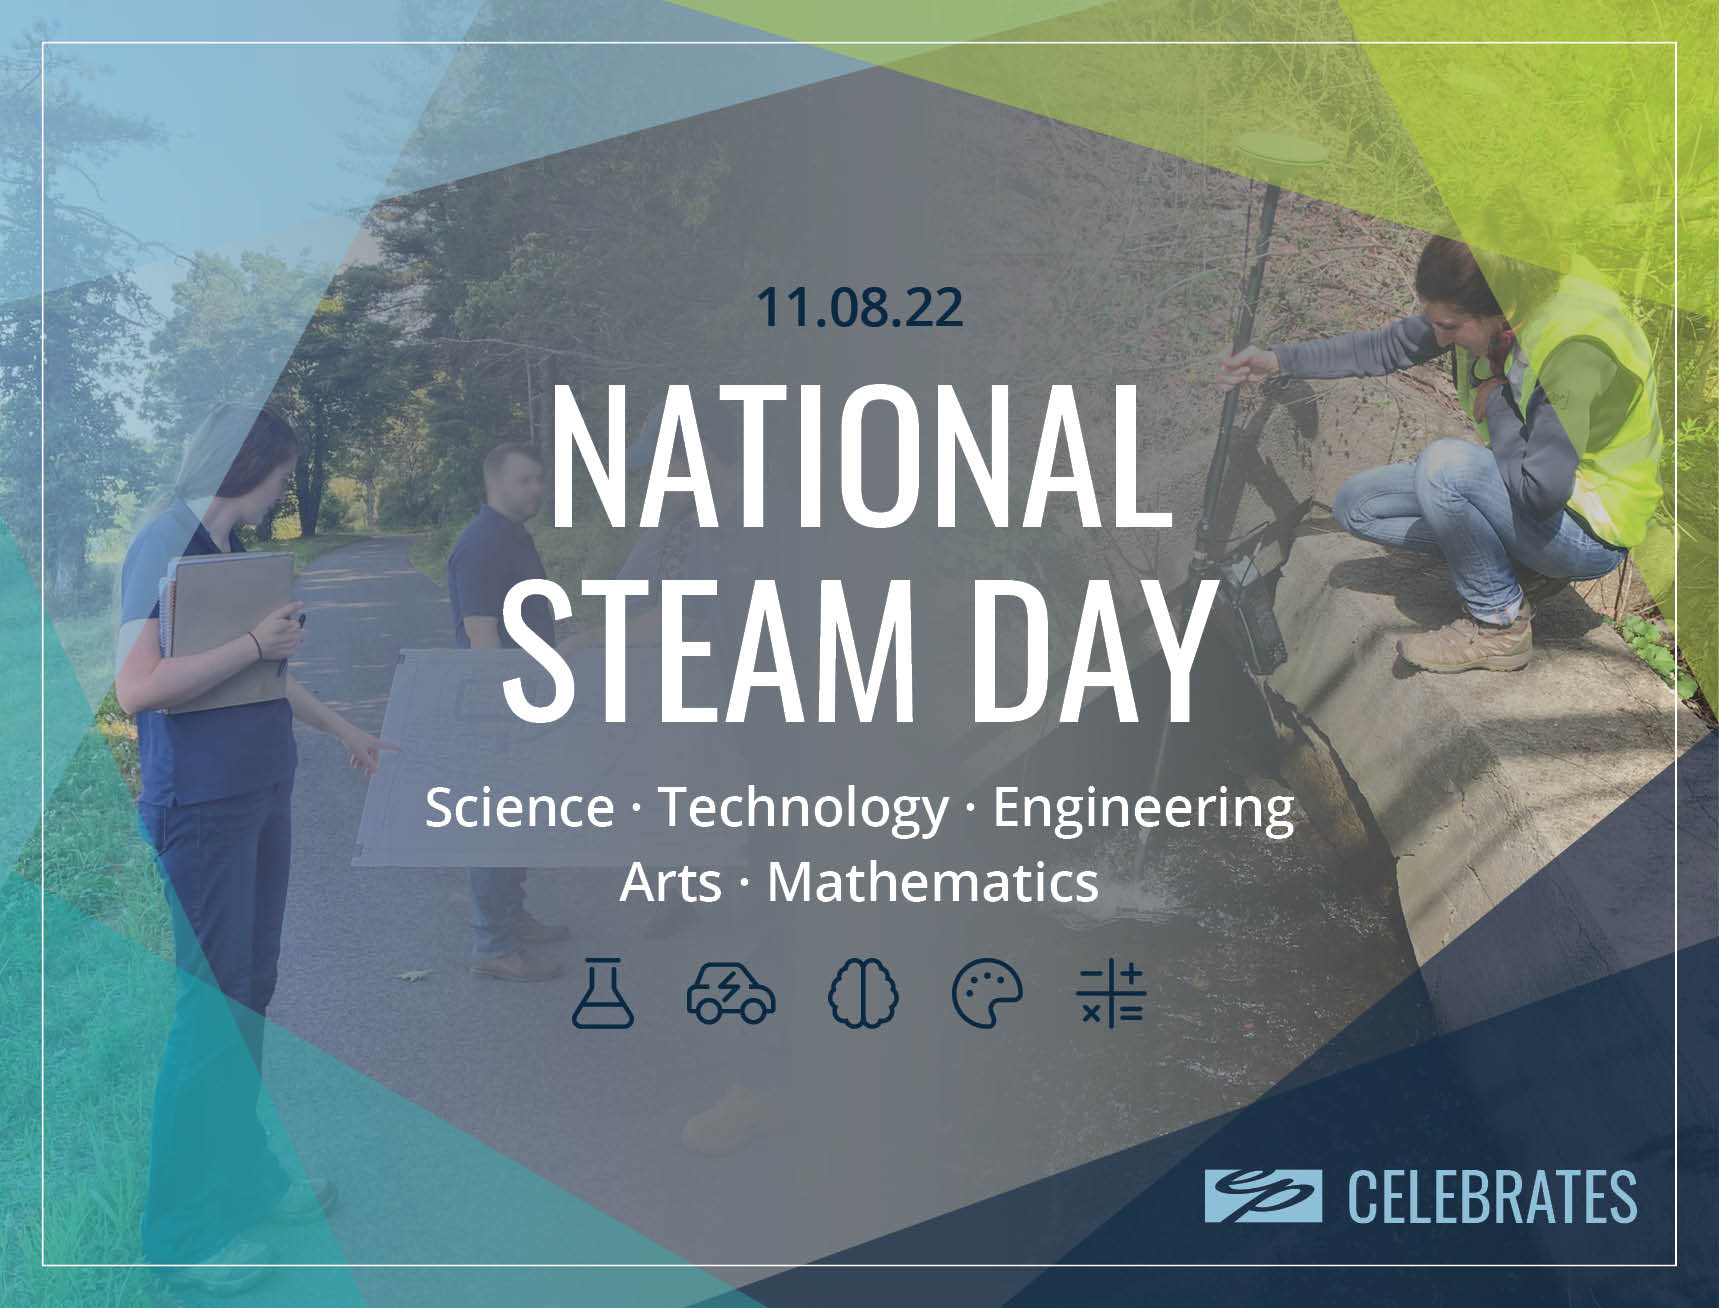 EP Celebrates National STEAM Day! Environmental Partners